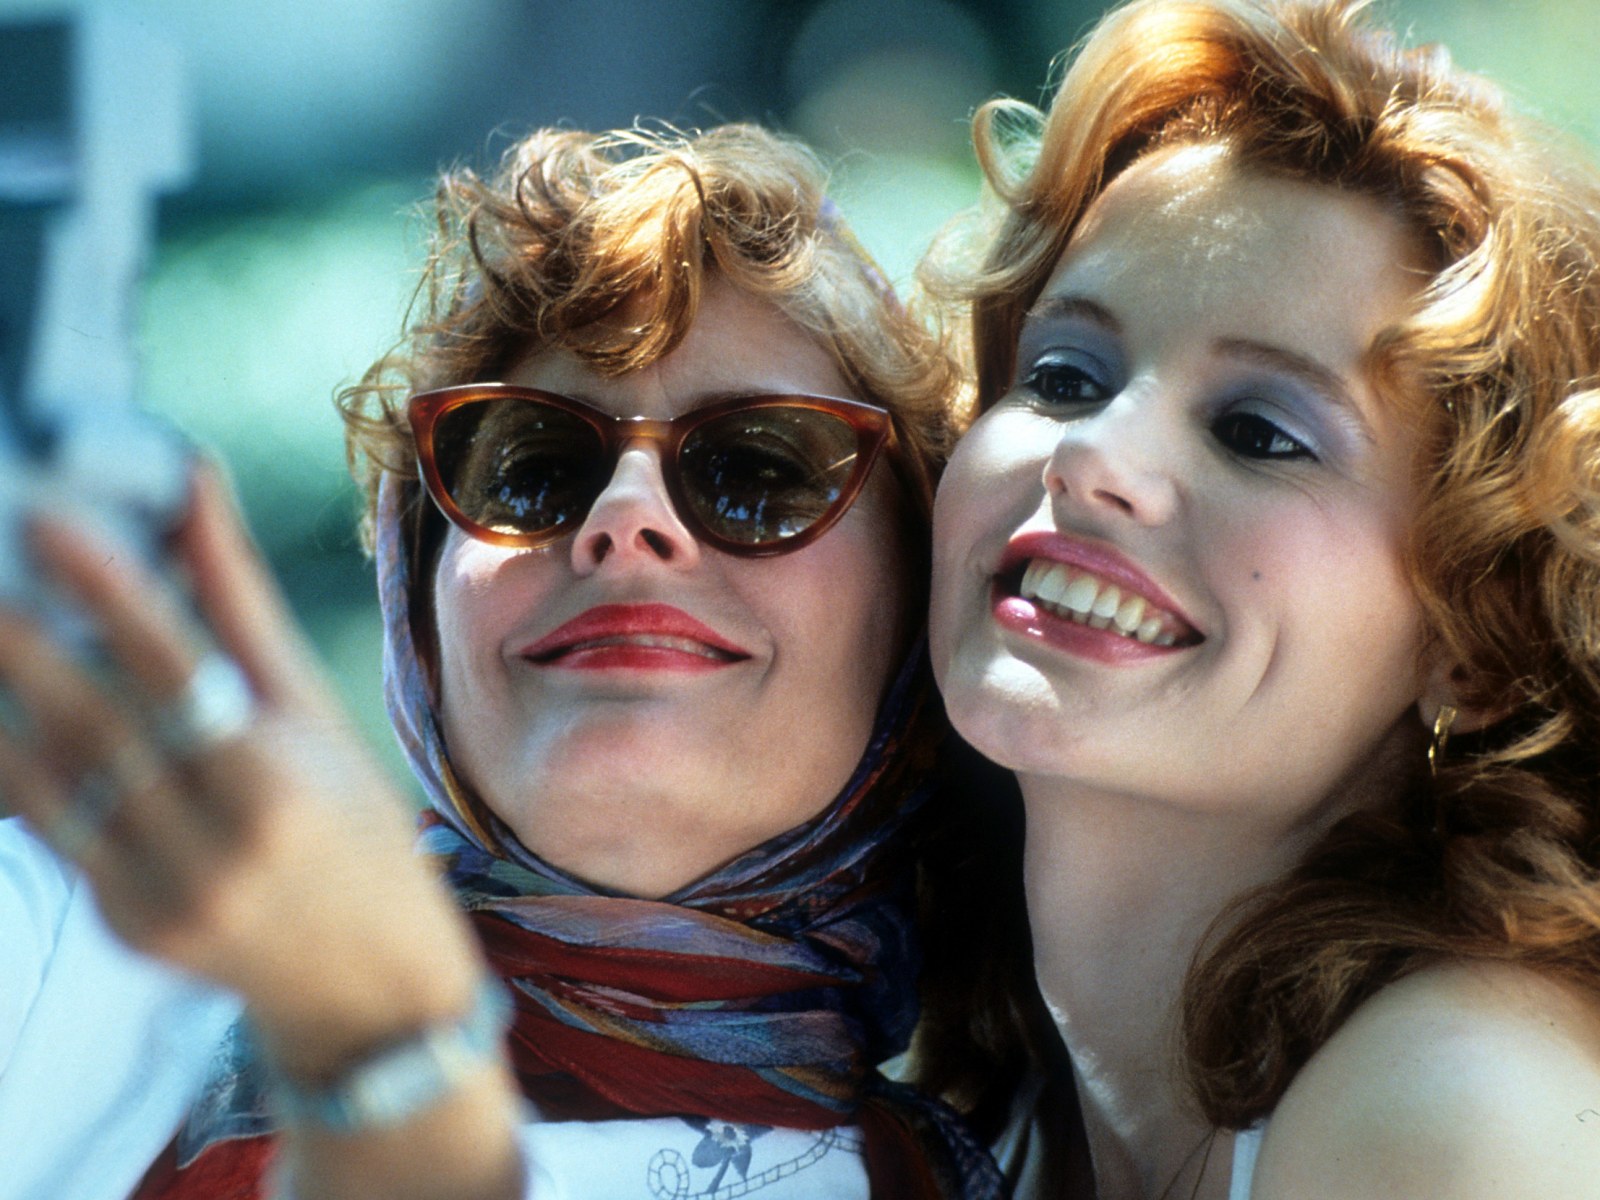 Thelma & Louise Hits The Road Once Again In A Director-approved 4k